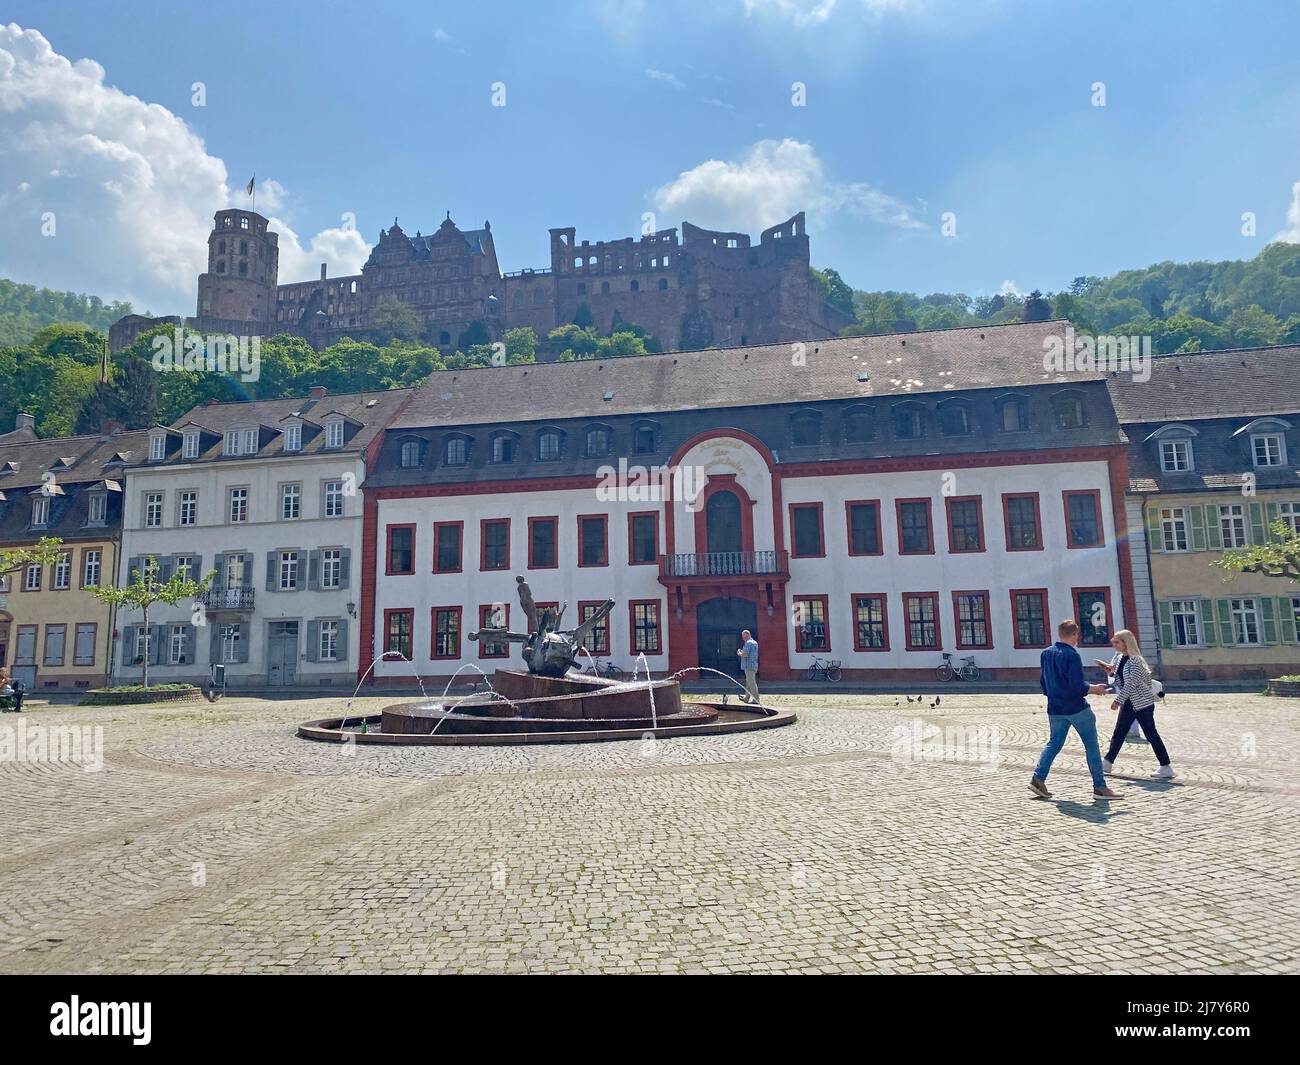 Academy of Sciences, Palais Boisserée and Karlsplatz in Heidelberg and Heidelberg Castle in the background. Stock Photo